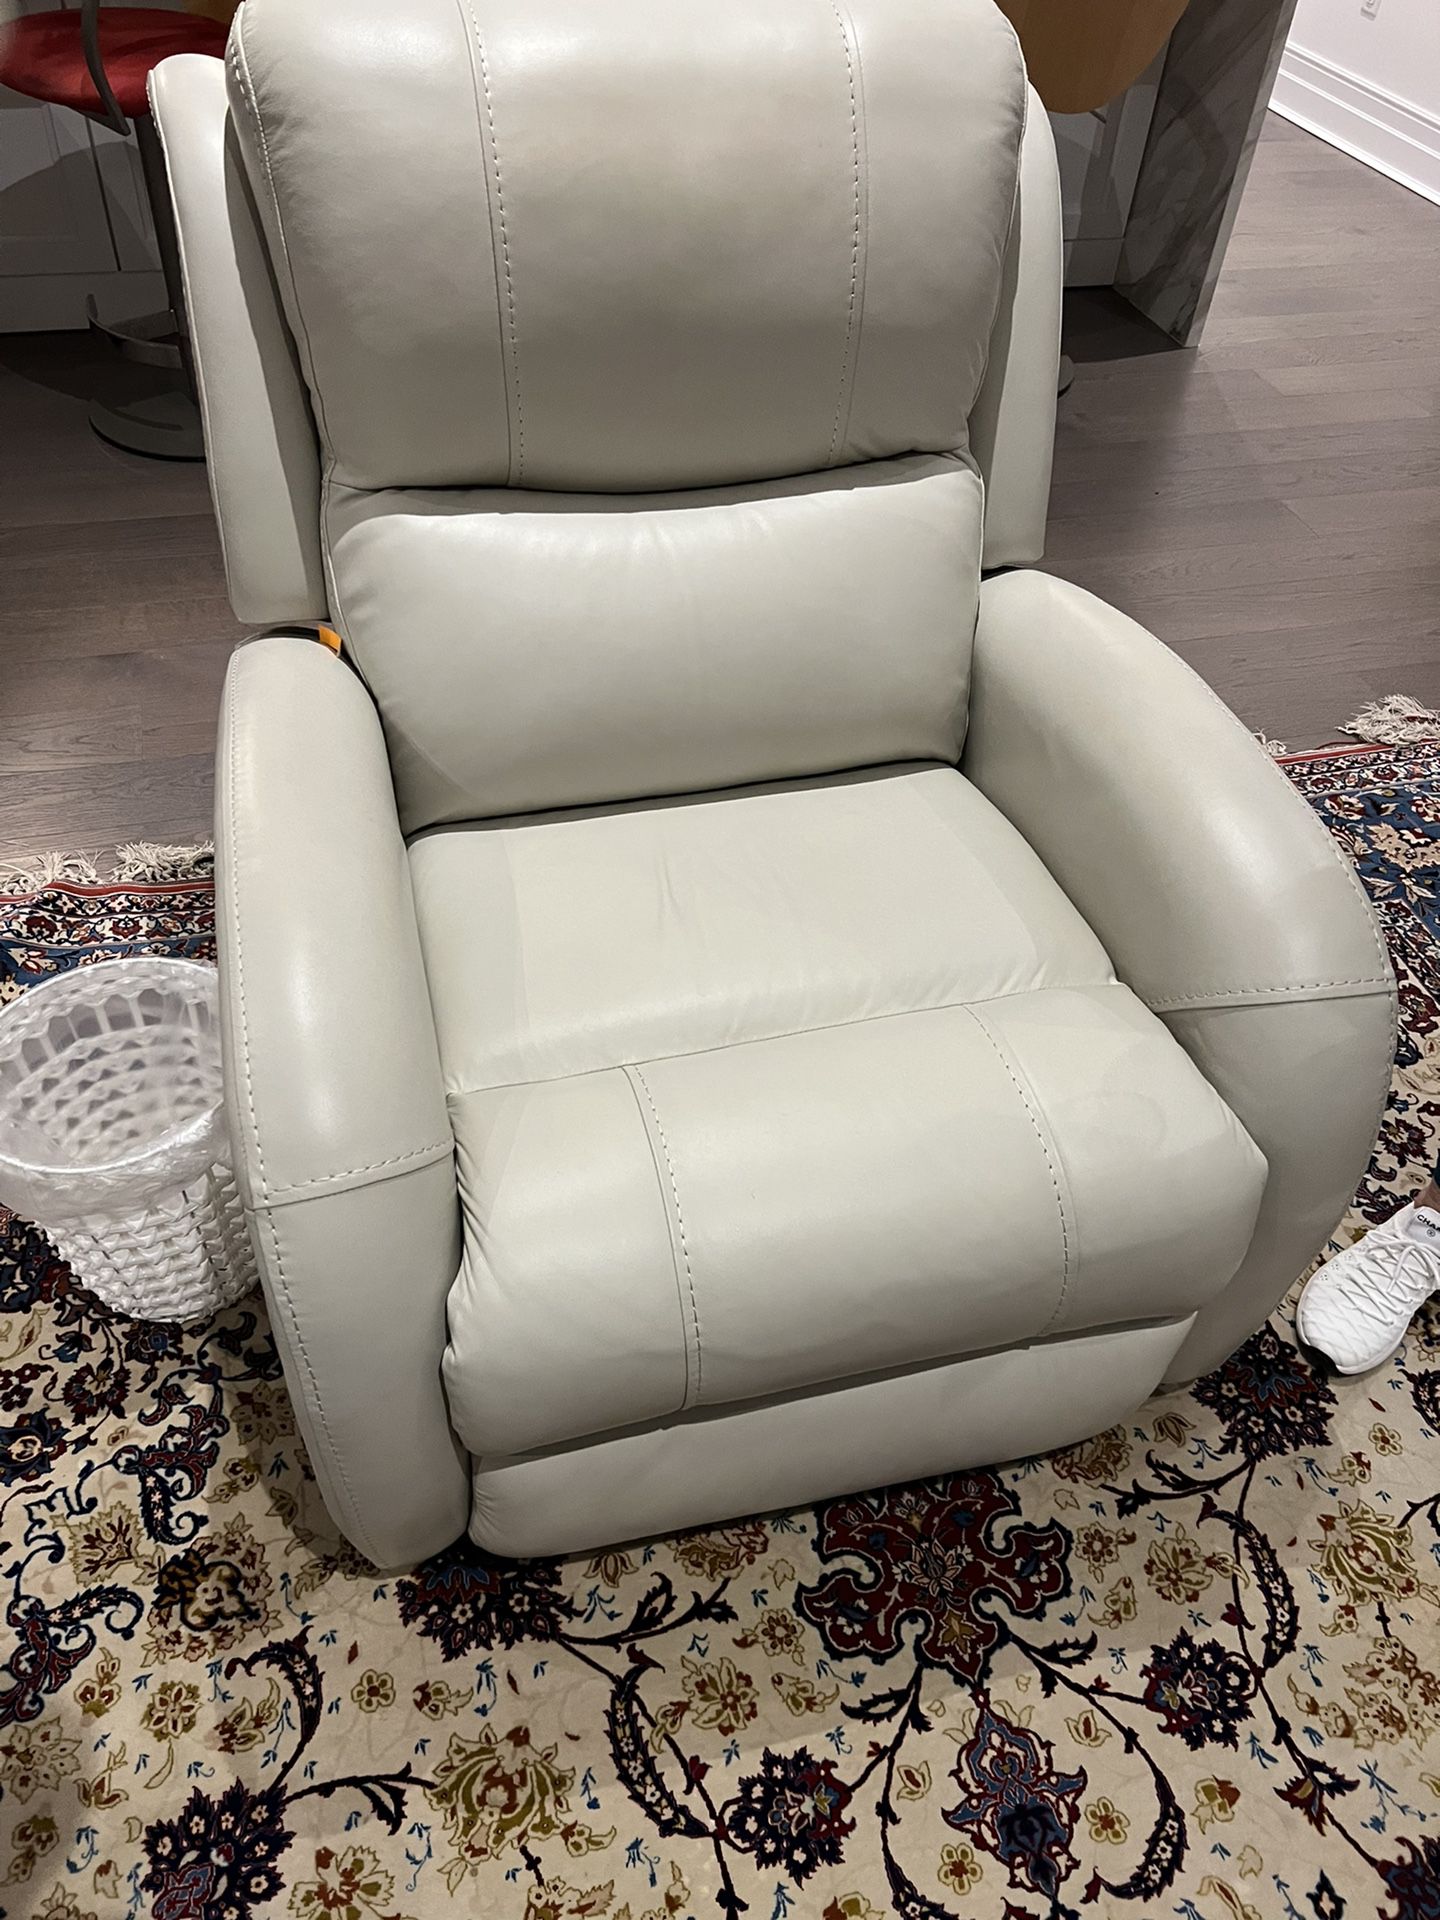 Beige leather reclining chair